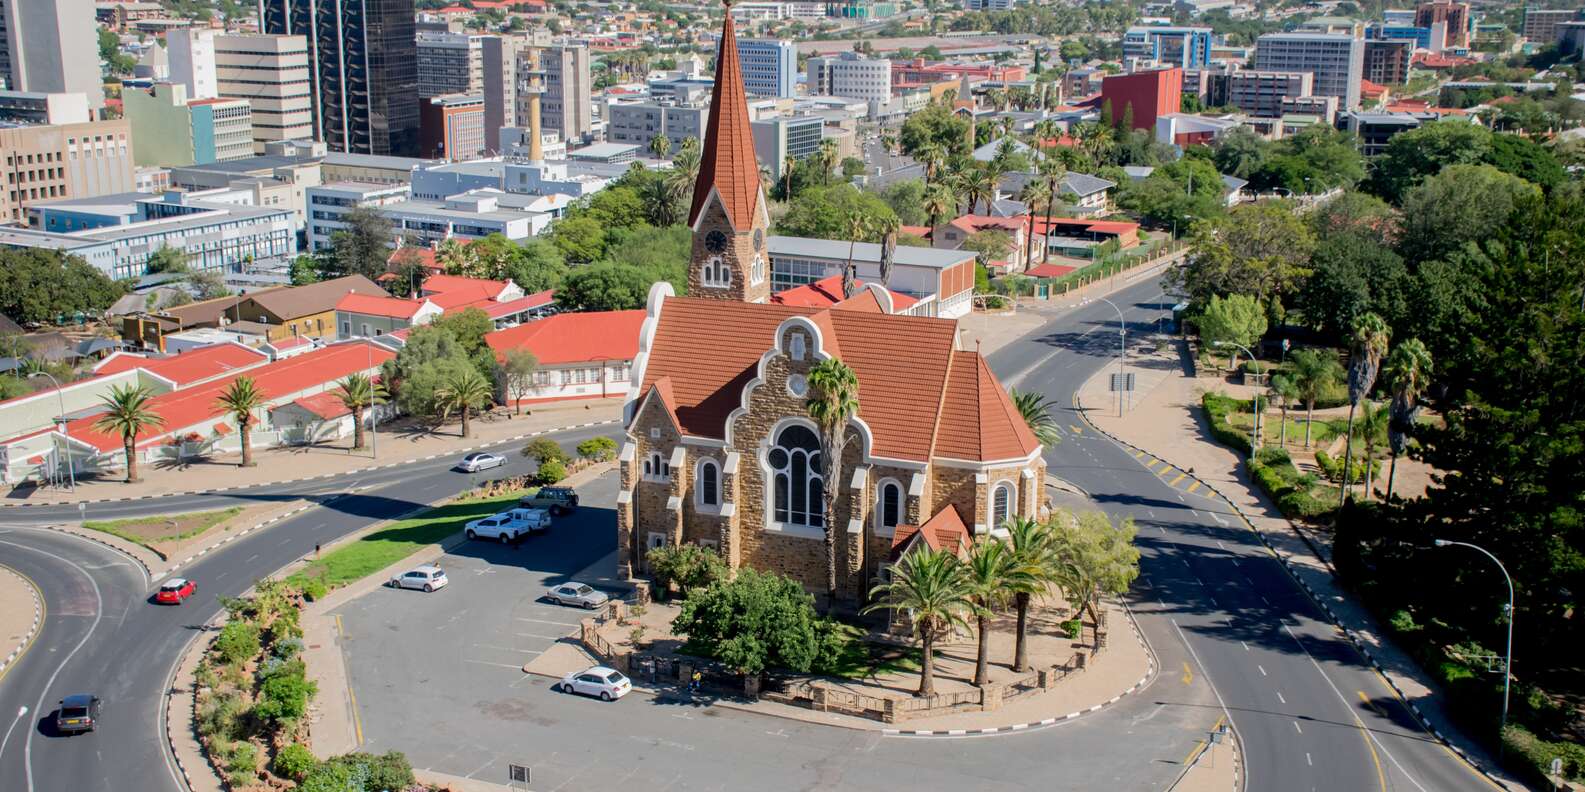 What to do in Windhoek